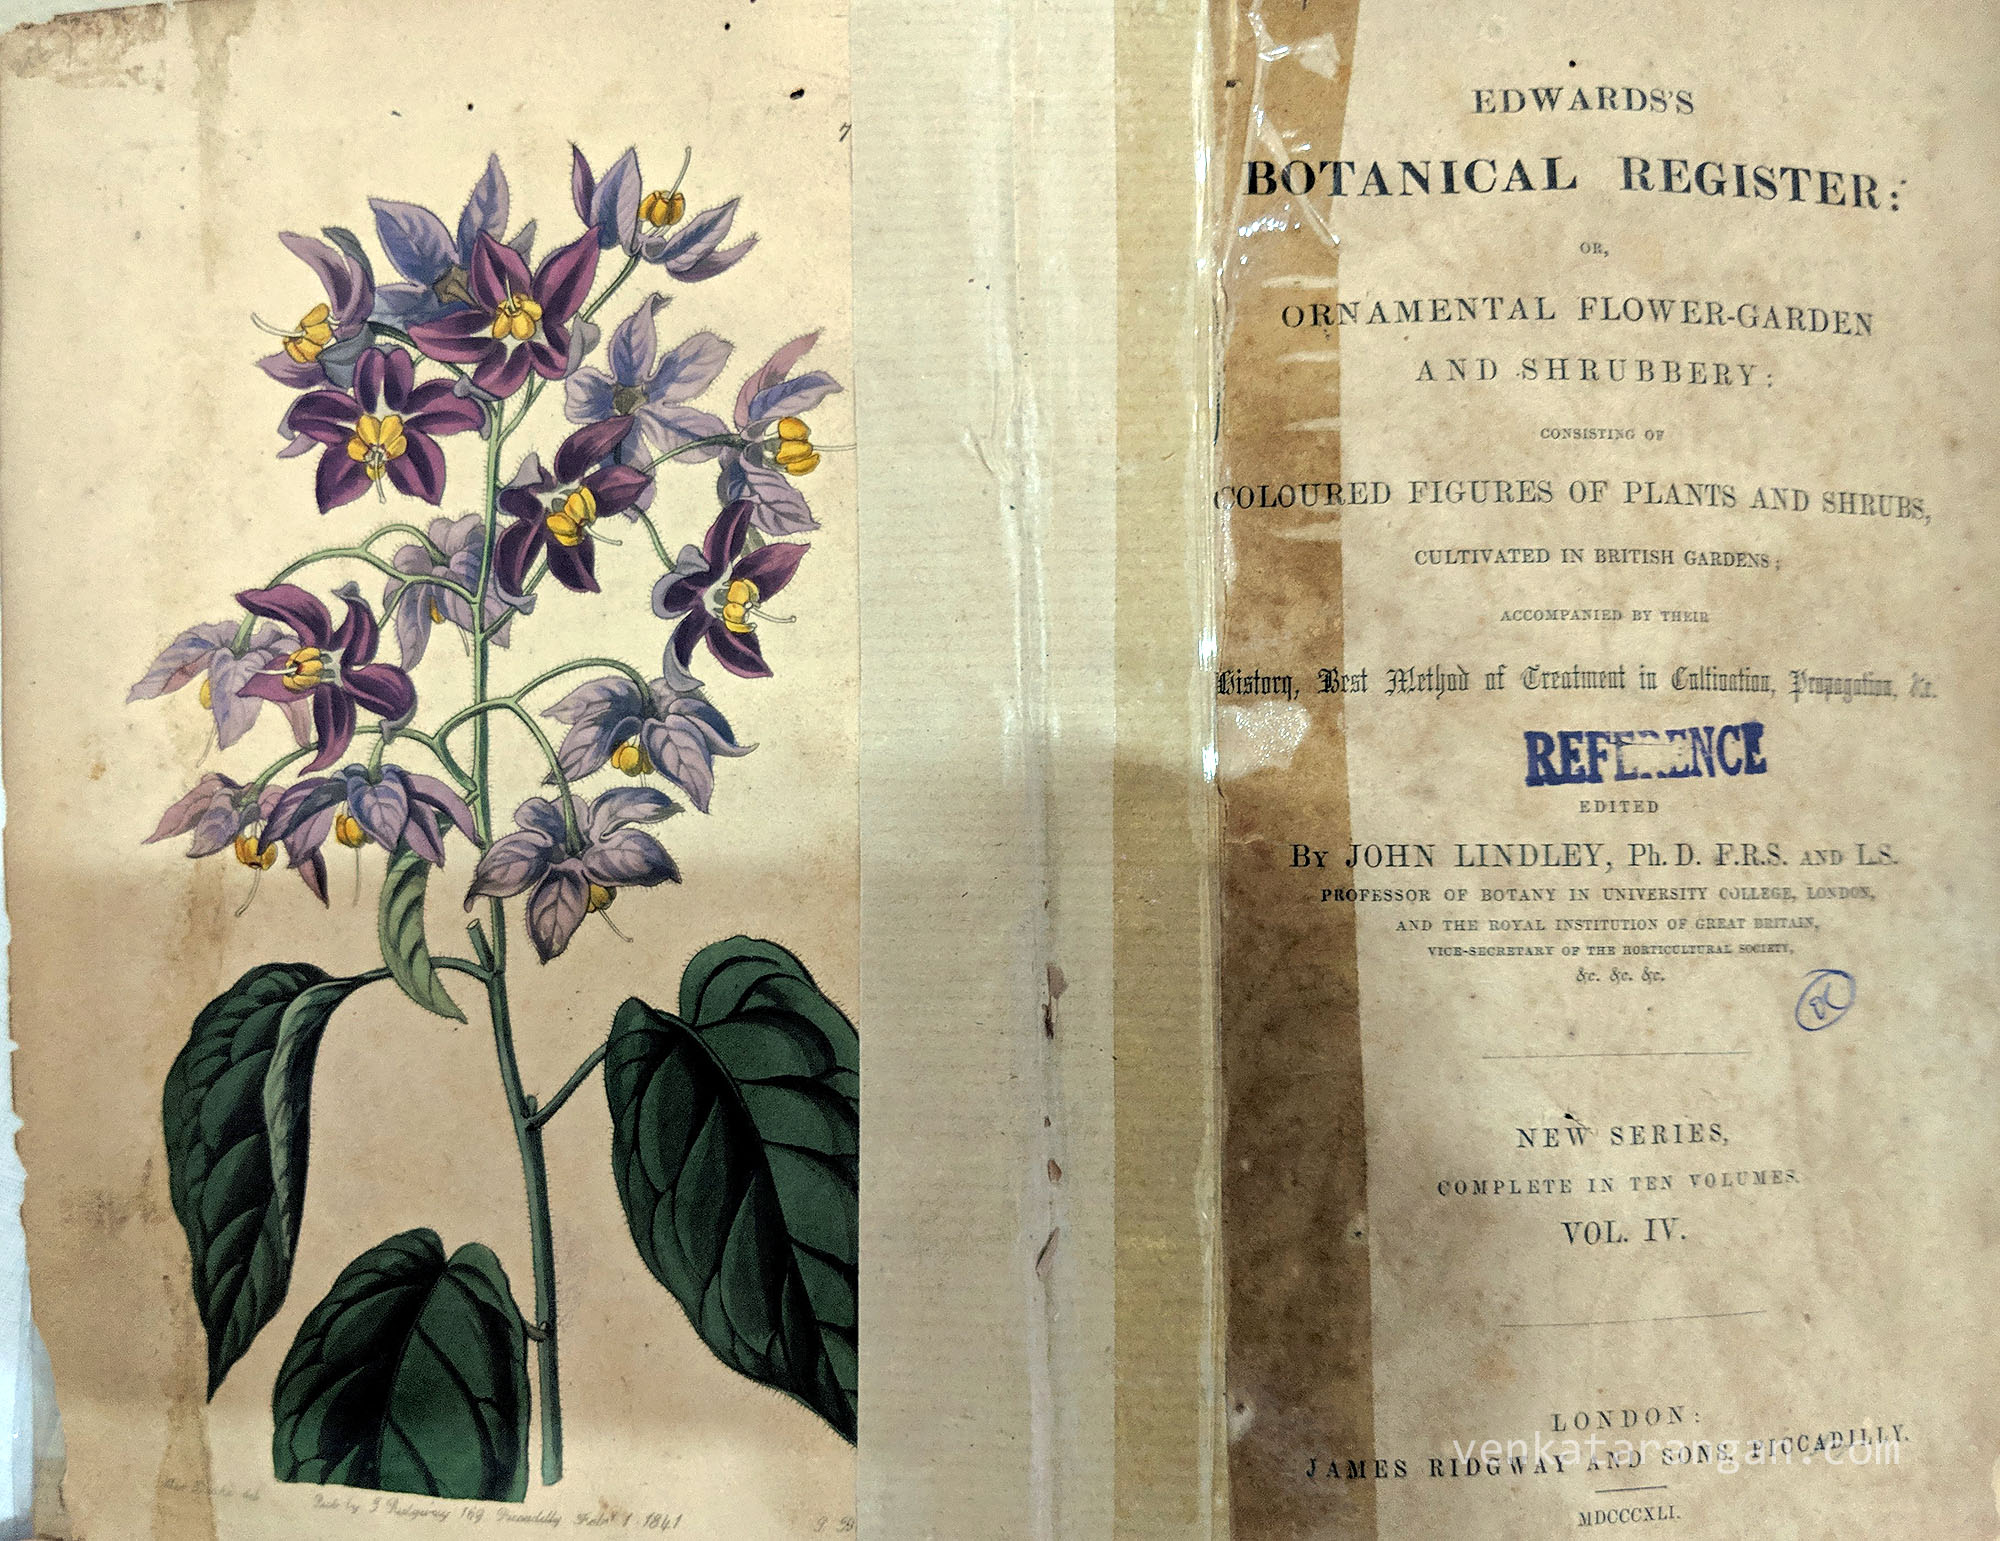 Edwards's Botanical Register - Ornamental Flower-Garden and Shrubbery consisting of Coloured Figures of Plants and Shrubs cultivated in British Gardens. By John Lindley, Published by James Ridgway and Sons, Piccadilly. 1841